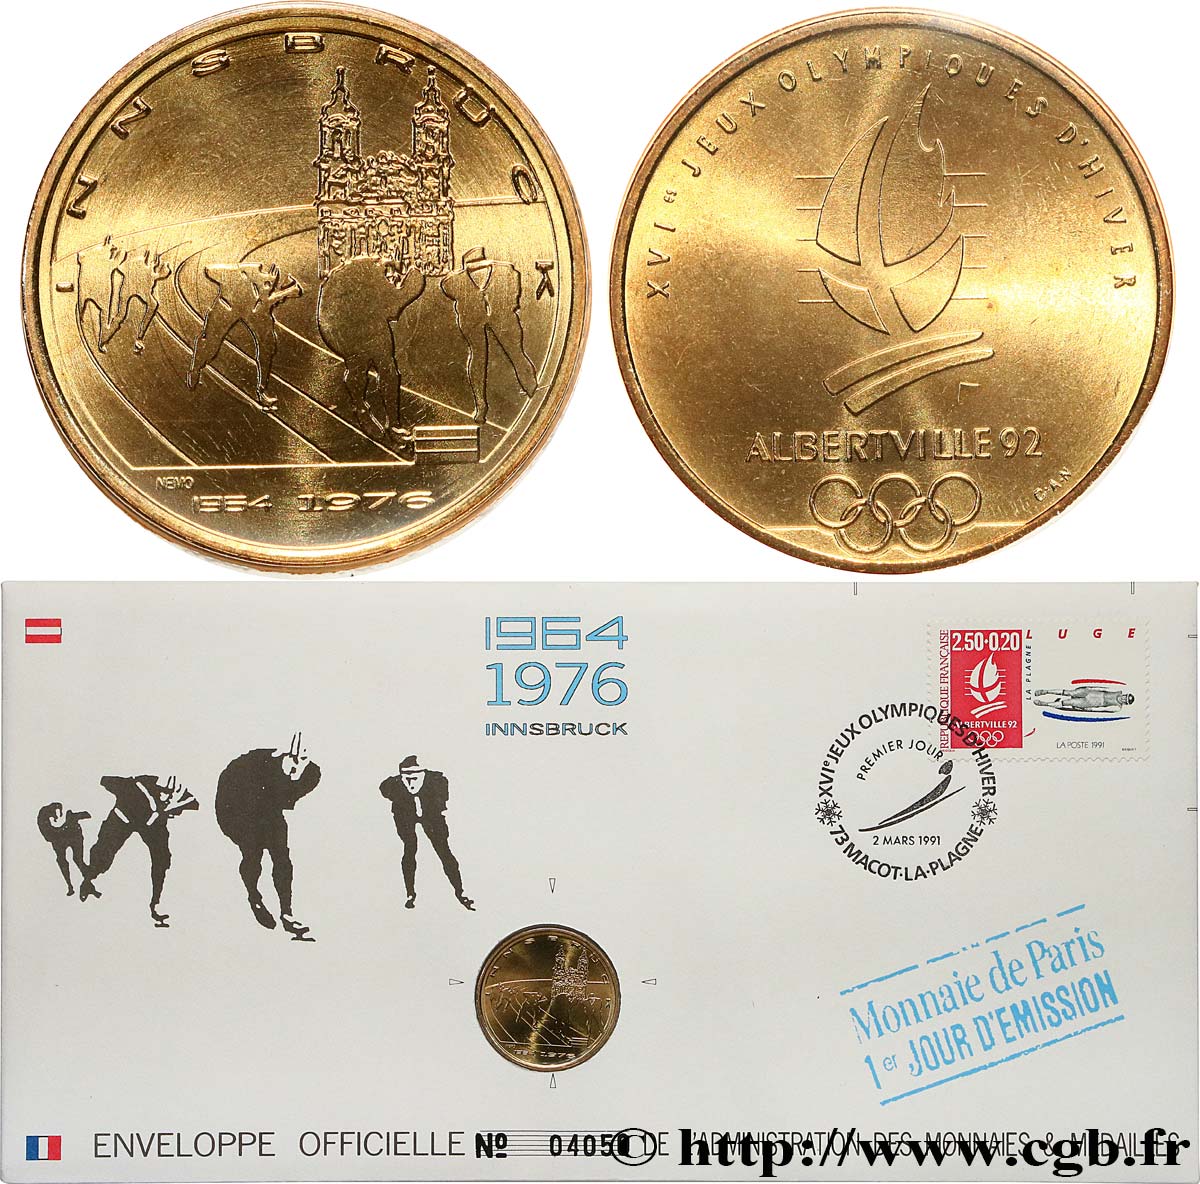 SPORTS Enveloppe “Timbre médaille” n°12 MS